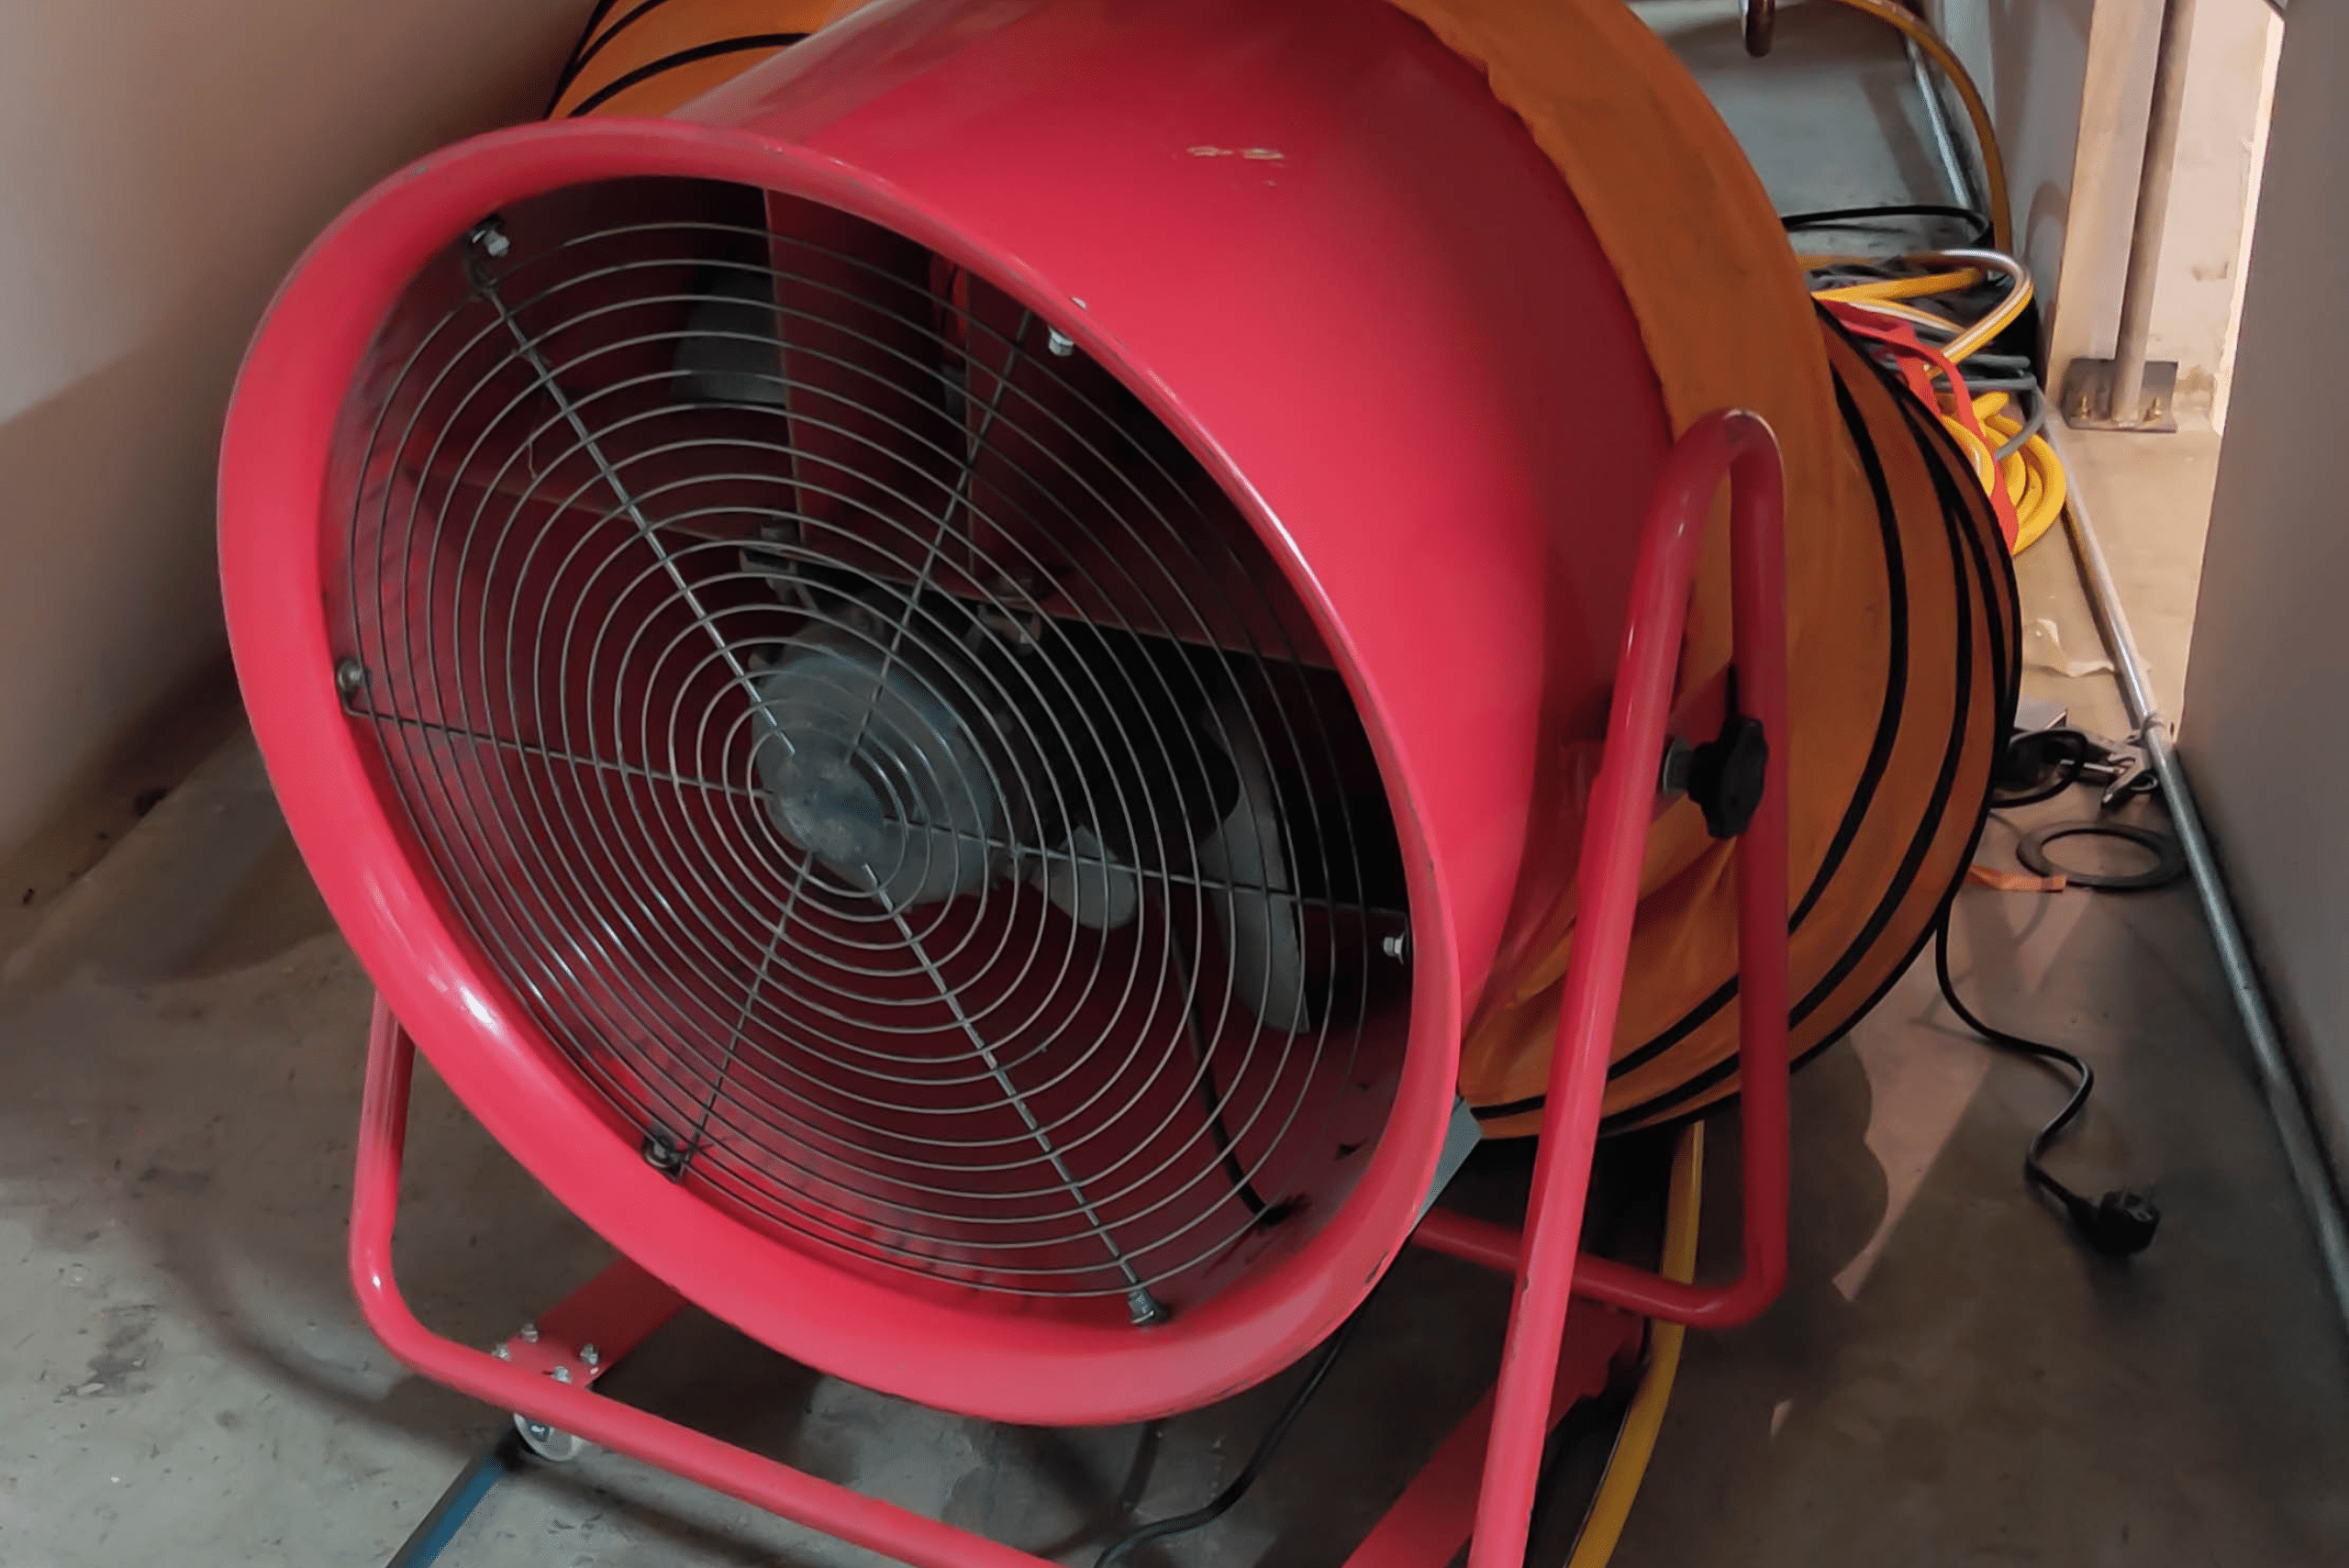 Tube fan that is red connected to an orange tube.